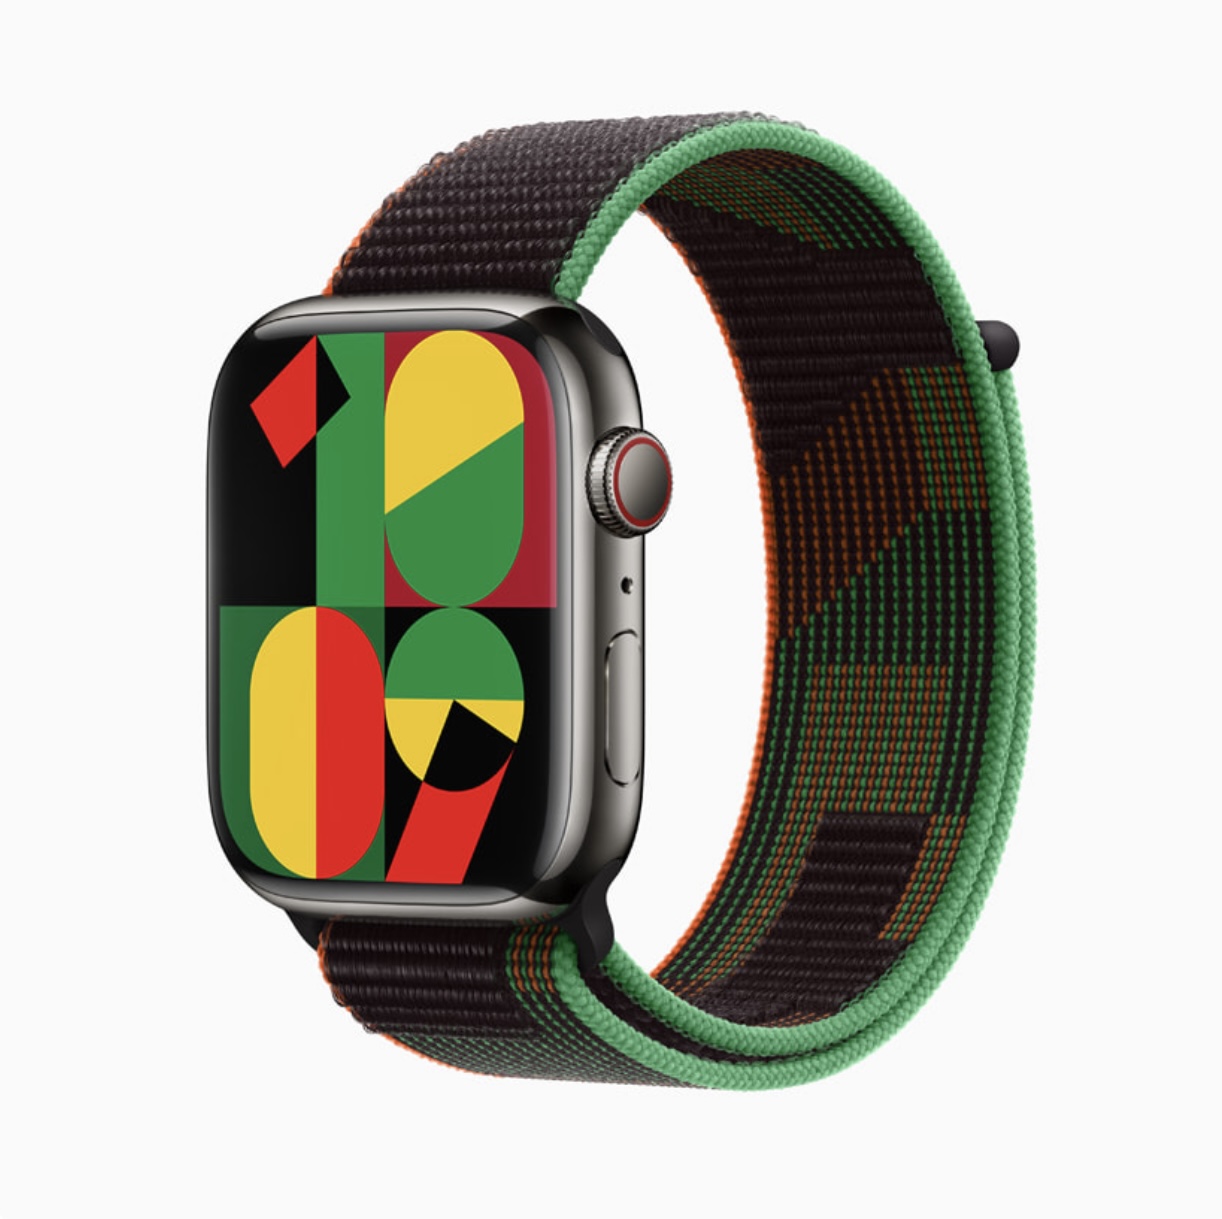 Apple launches new Black Unity Apple Watch strap to celebrate Black History Month